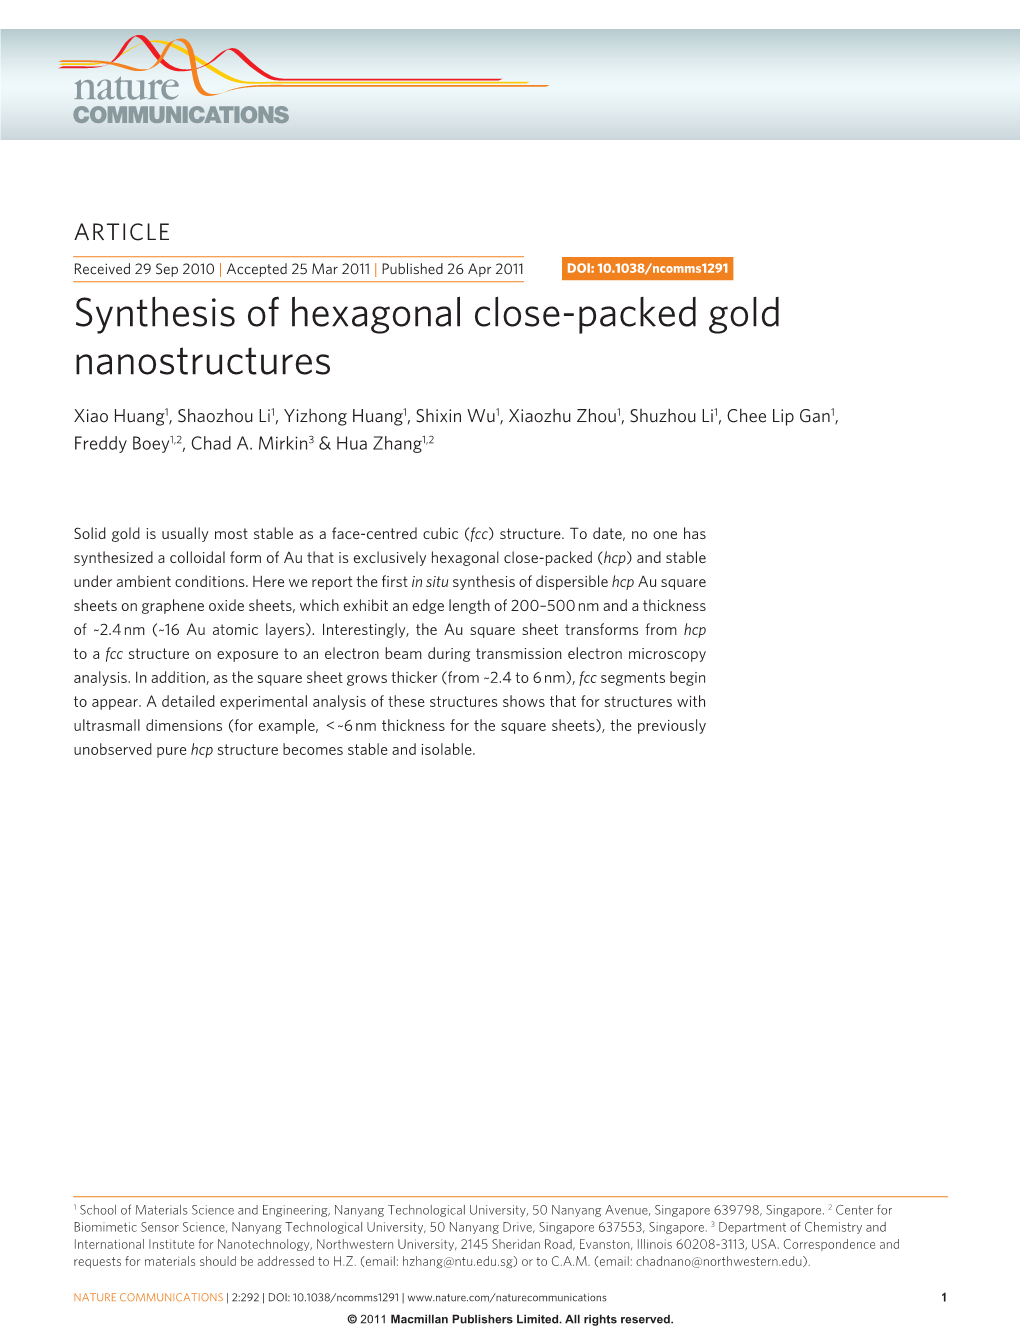 Synthesis of Hexagonal Close-Packed Gold Nanostructures